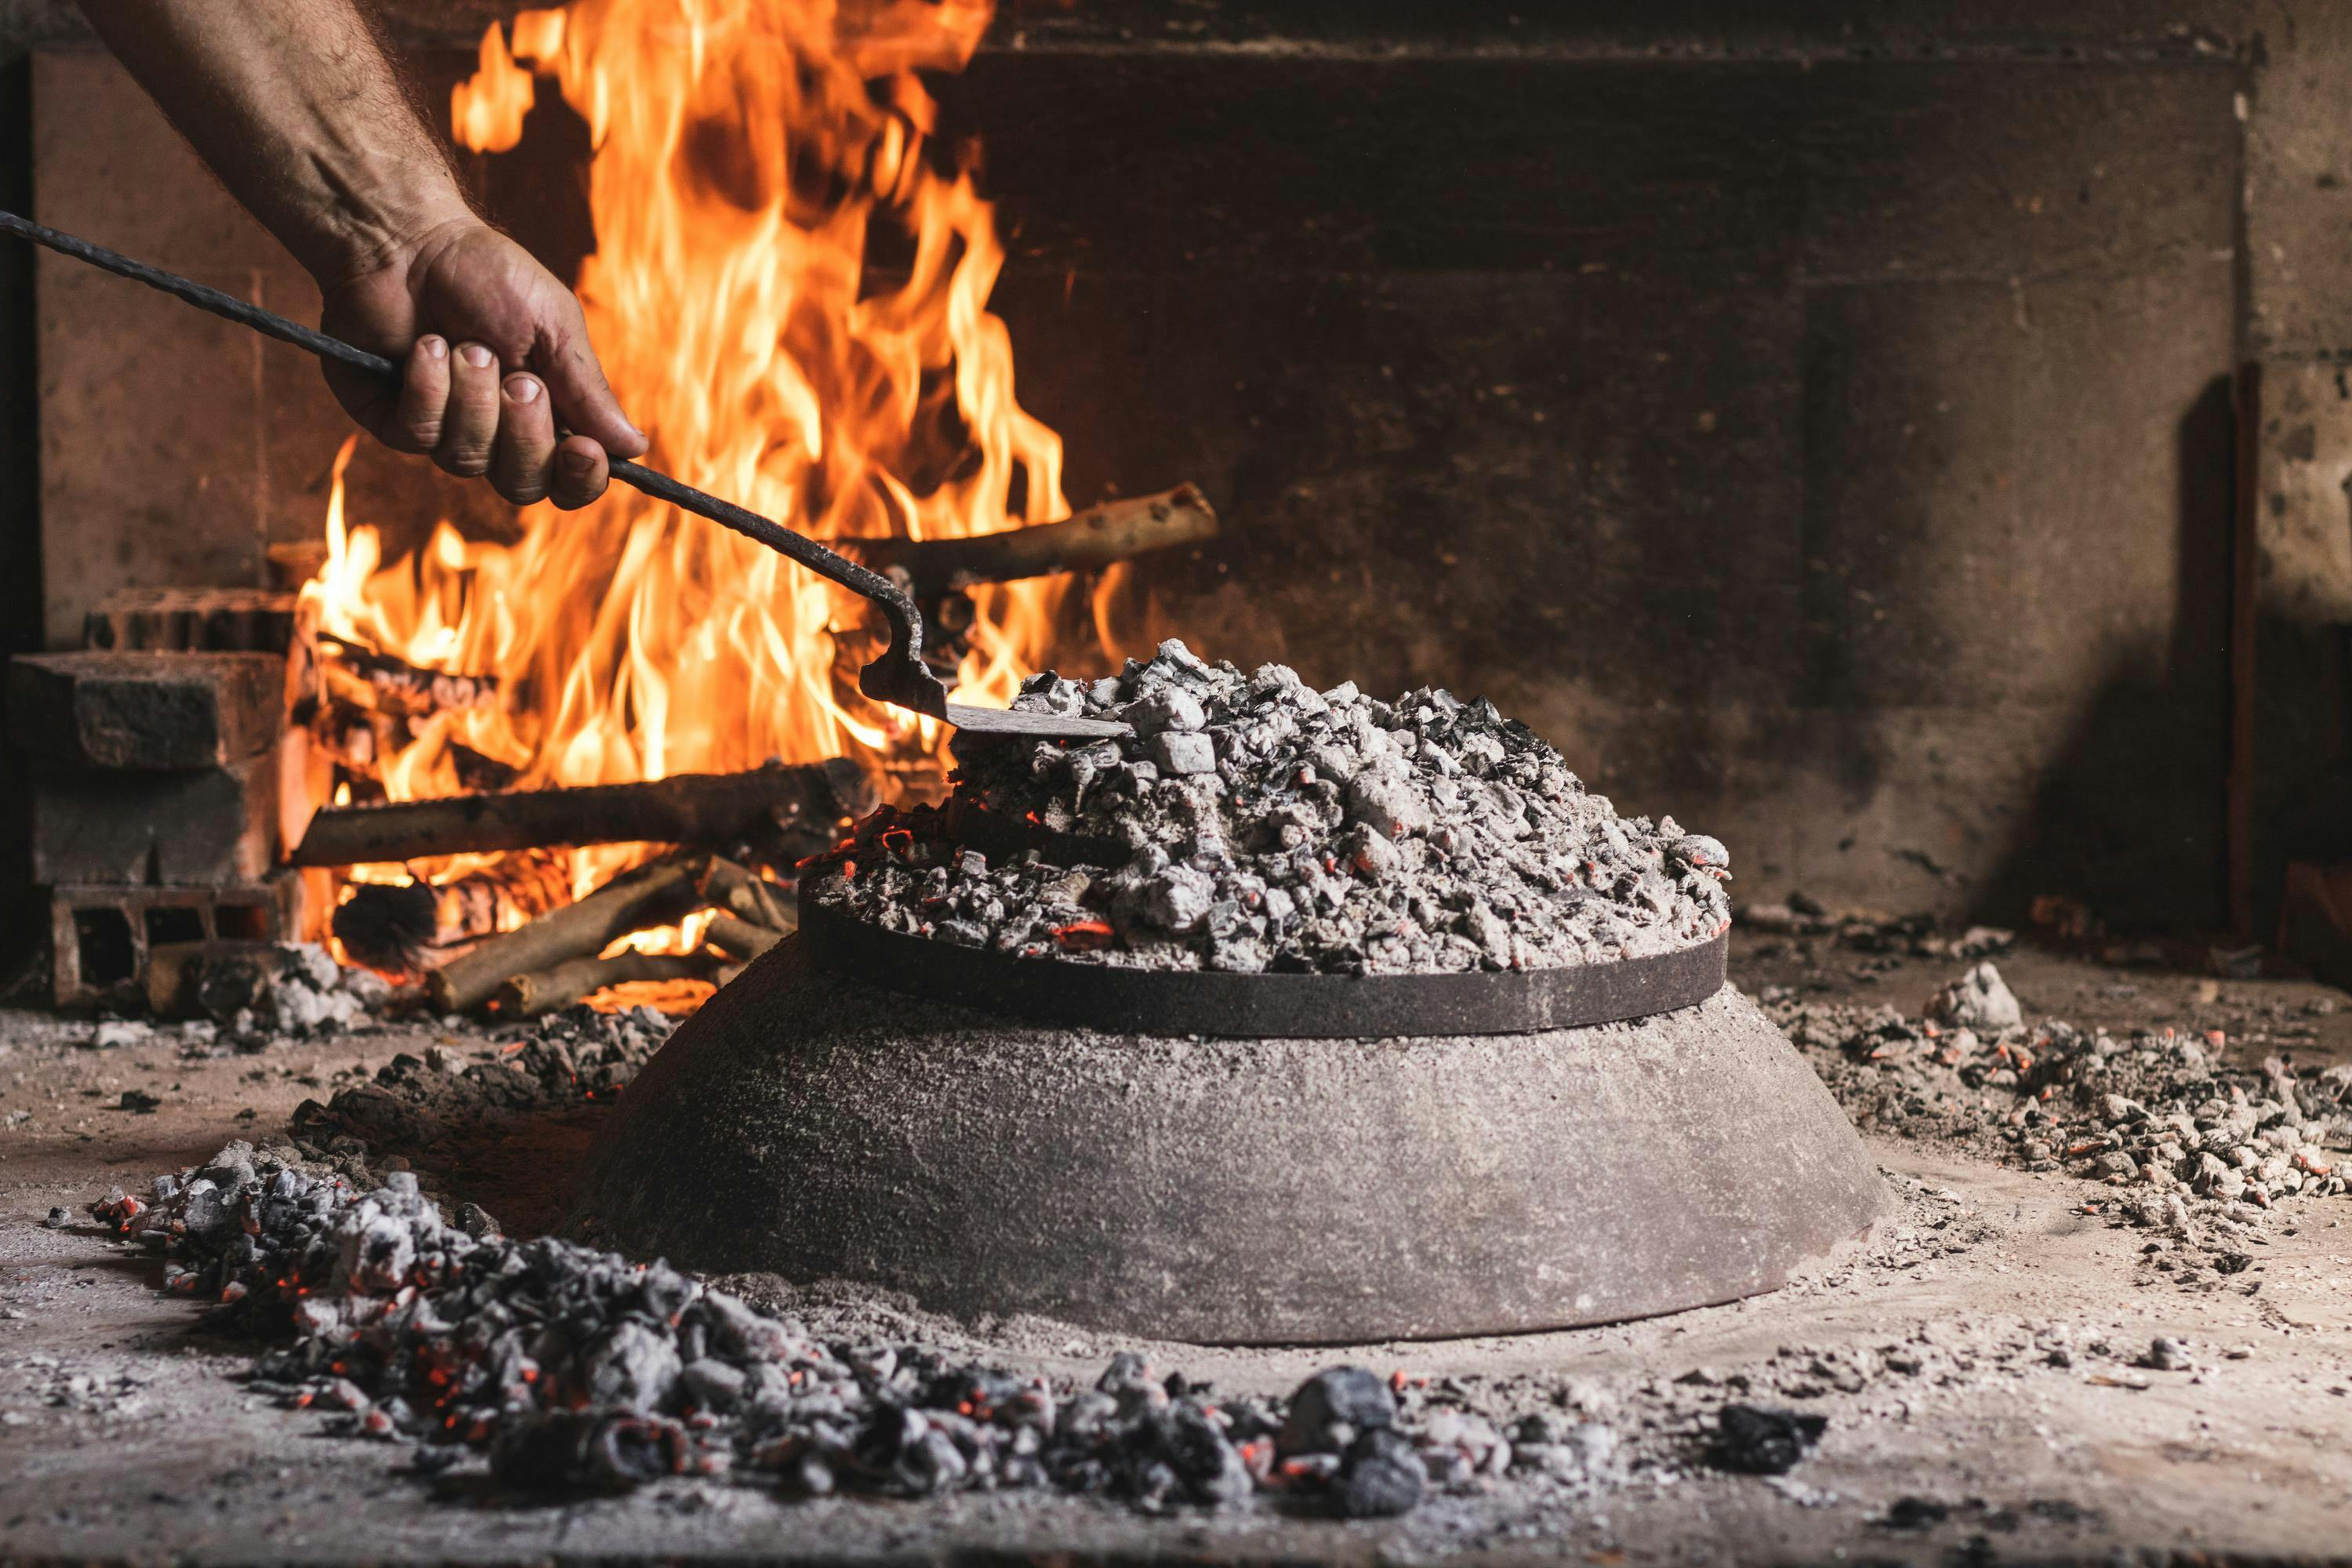 A local chef demonstrates how to cook Dalmatian peka, a traditional Croatian dish that's made by cooking meat and vegetables under a cast-iron dome. 